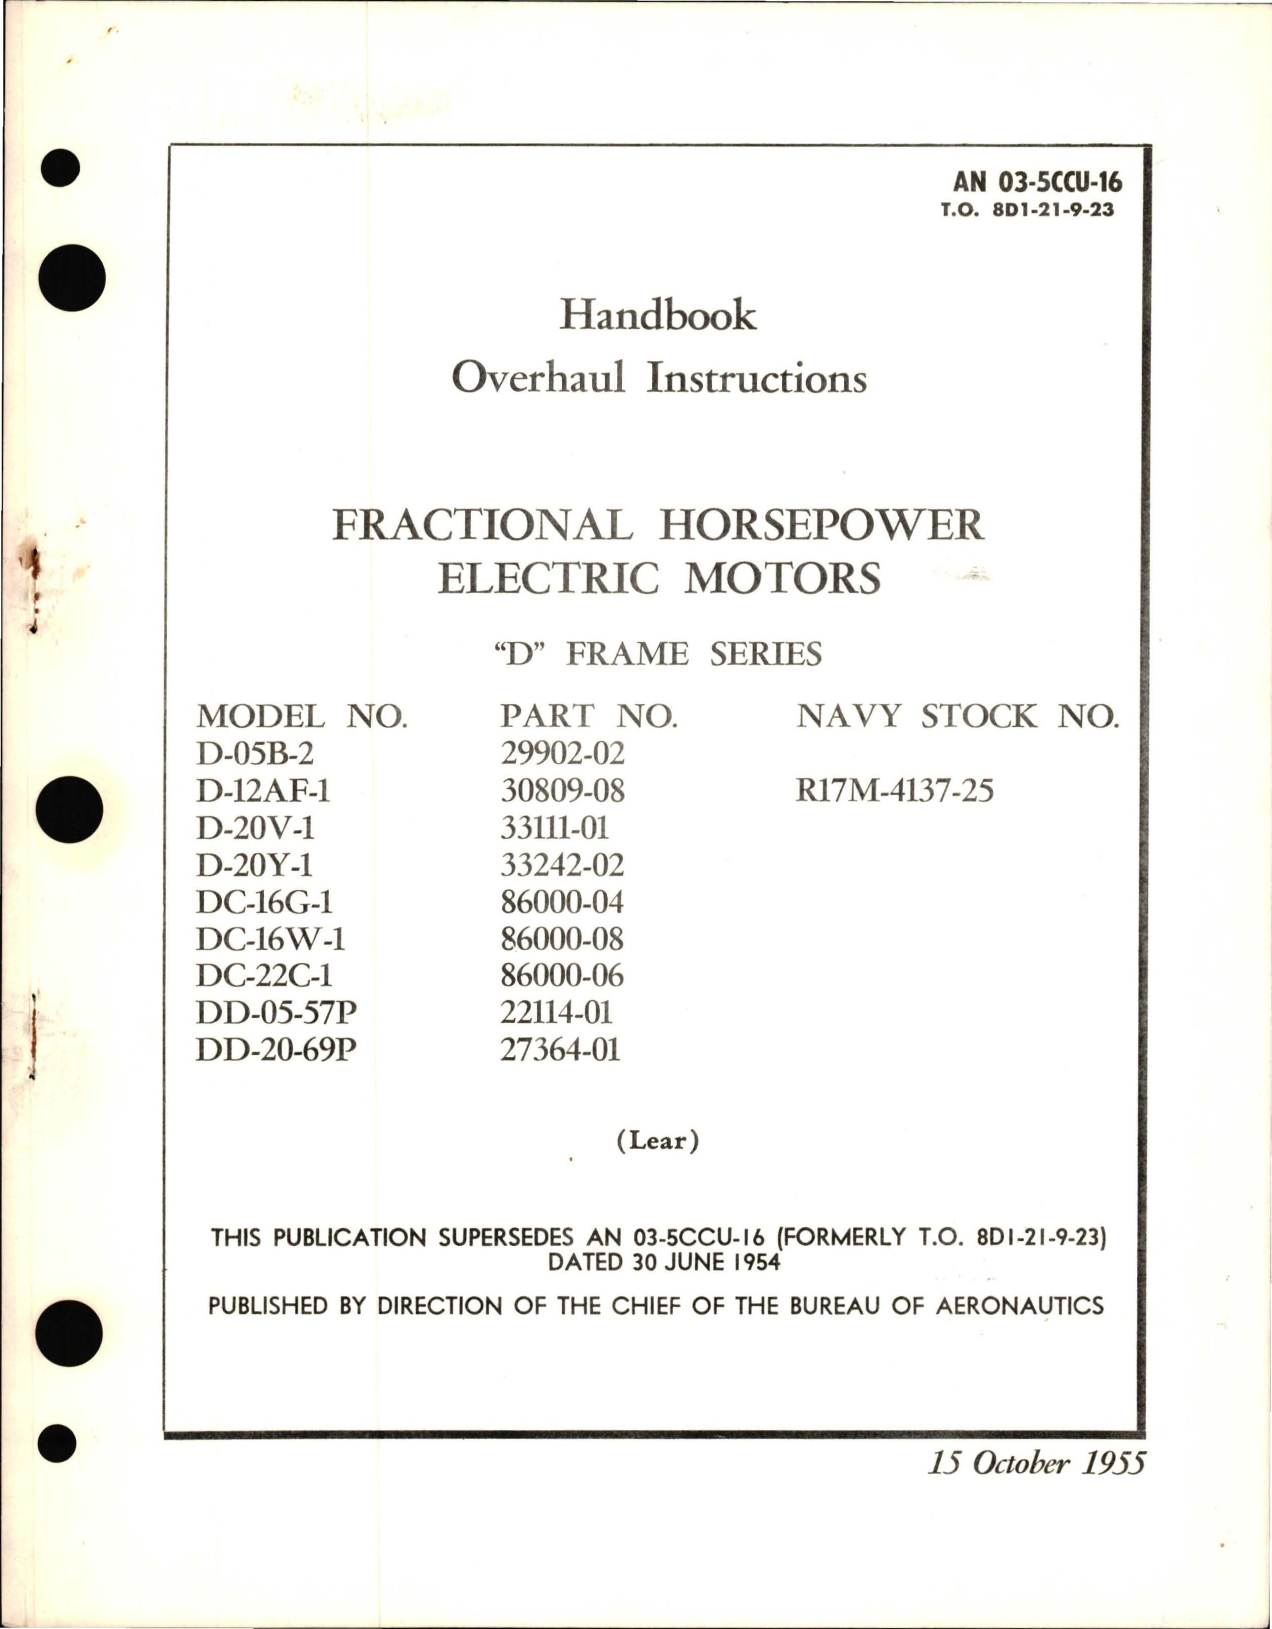 Sample page 1 from AirCorps Library document: Overhaul Instructions for Fractional Horsepower Electric Motors - D Frame Series